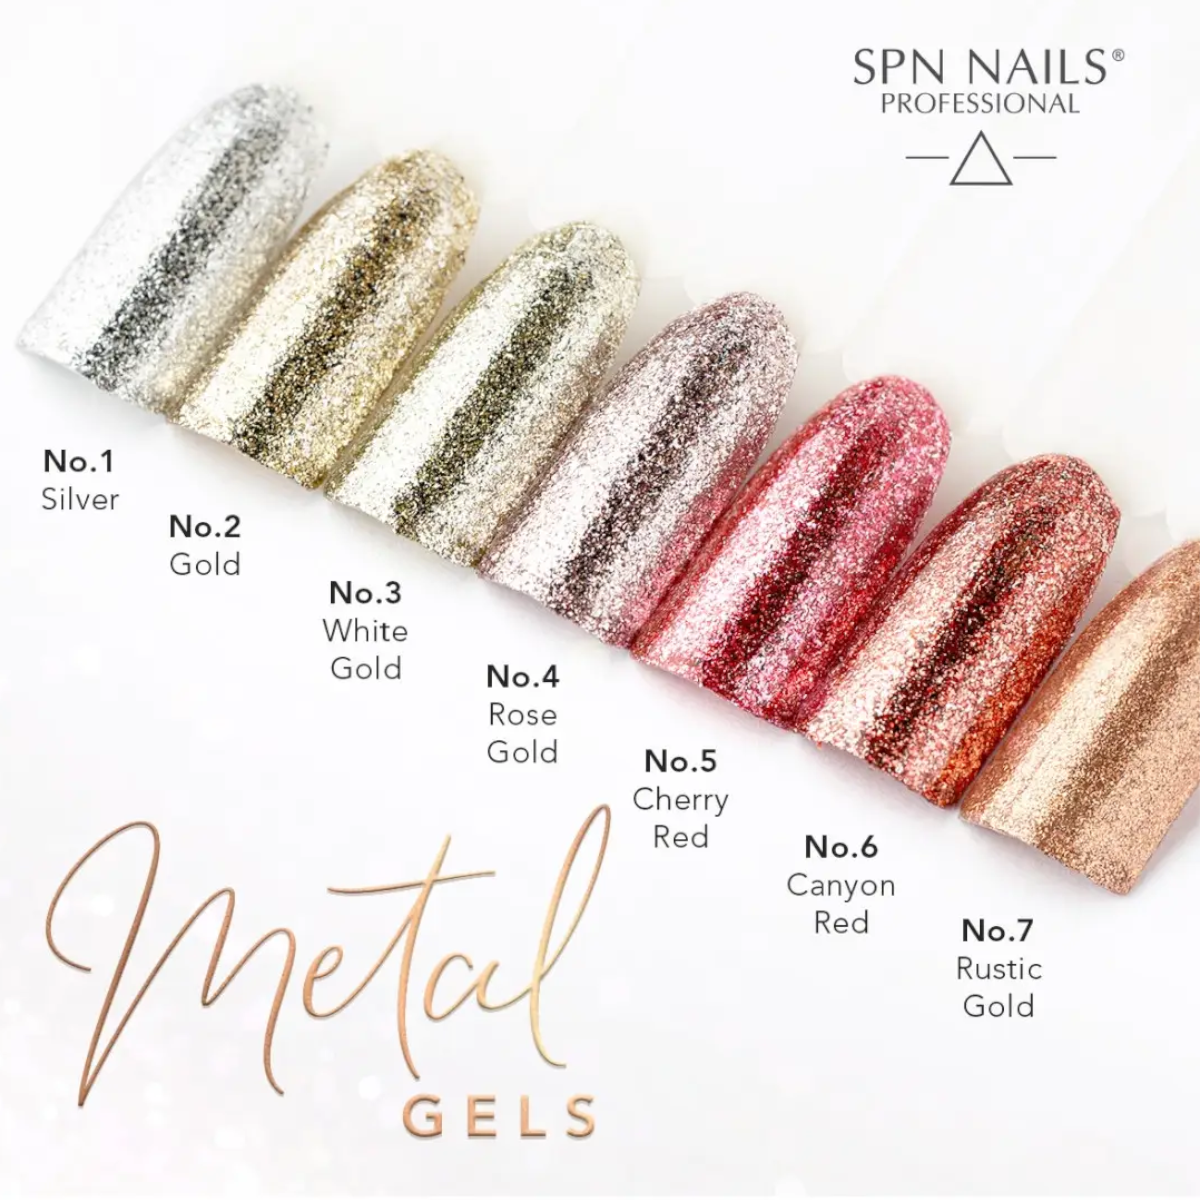 SPN Nails Metal Gel No.3 White Gold Glitter Collection